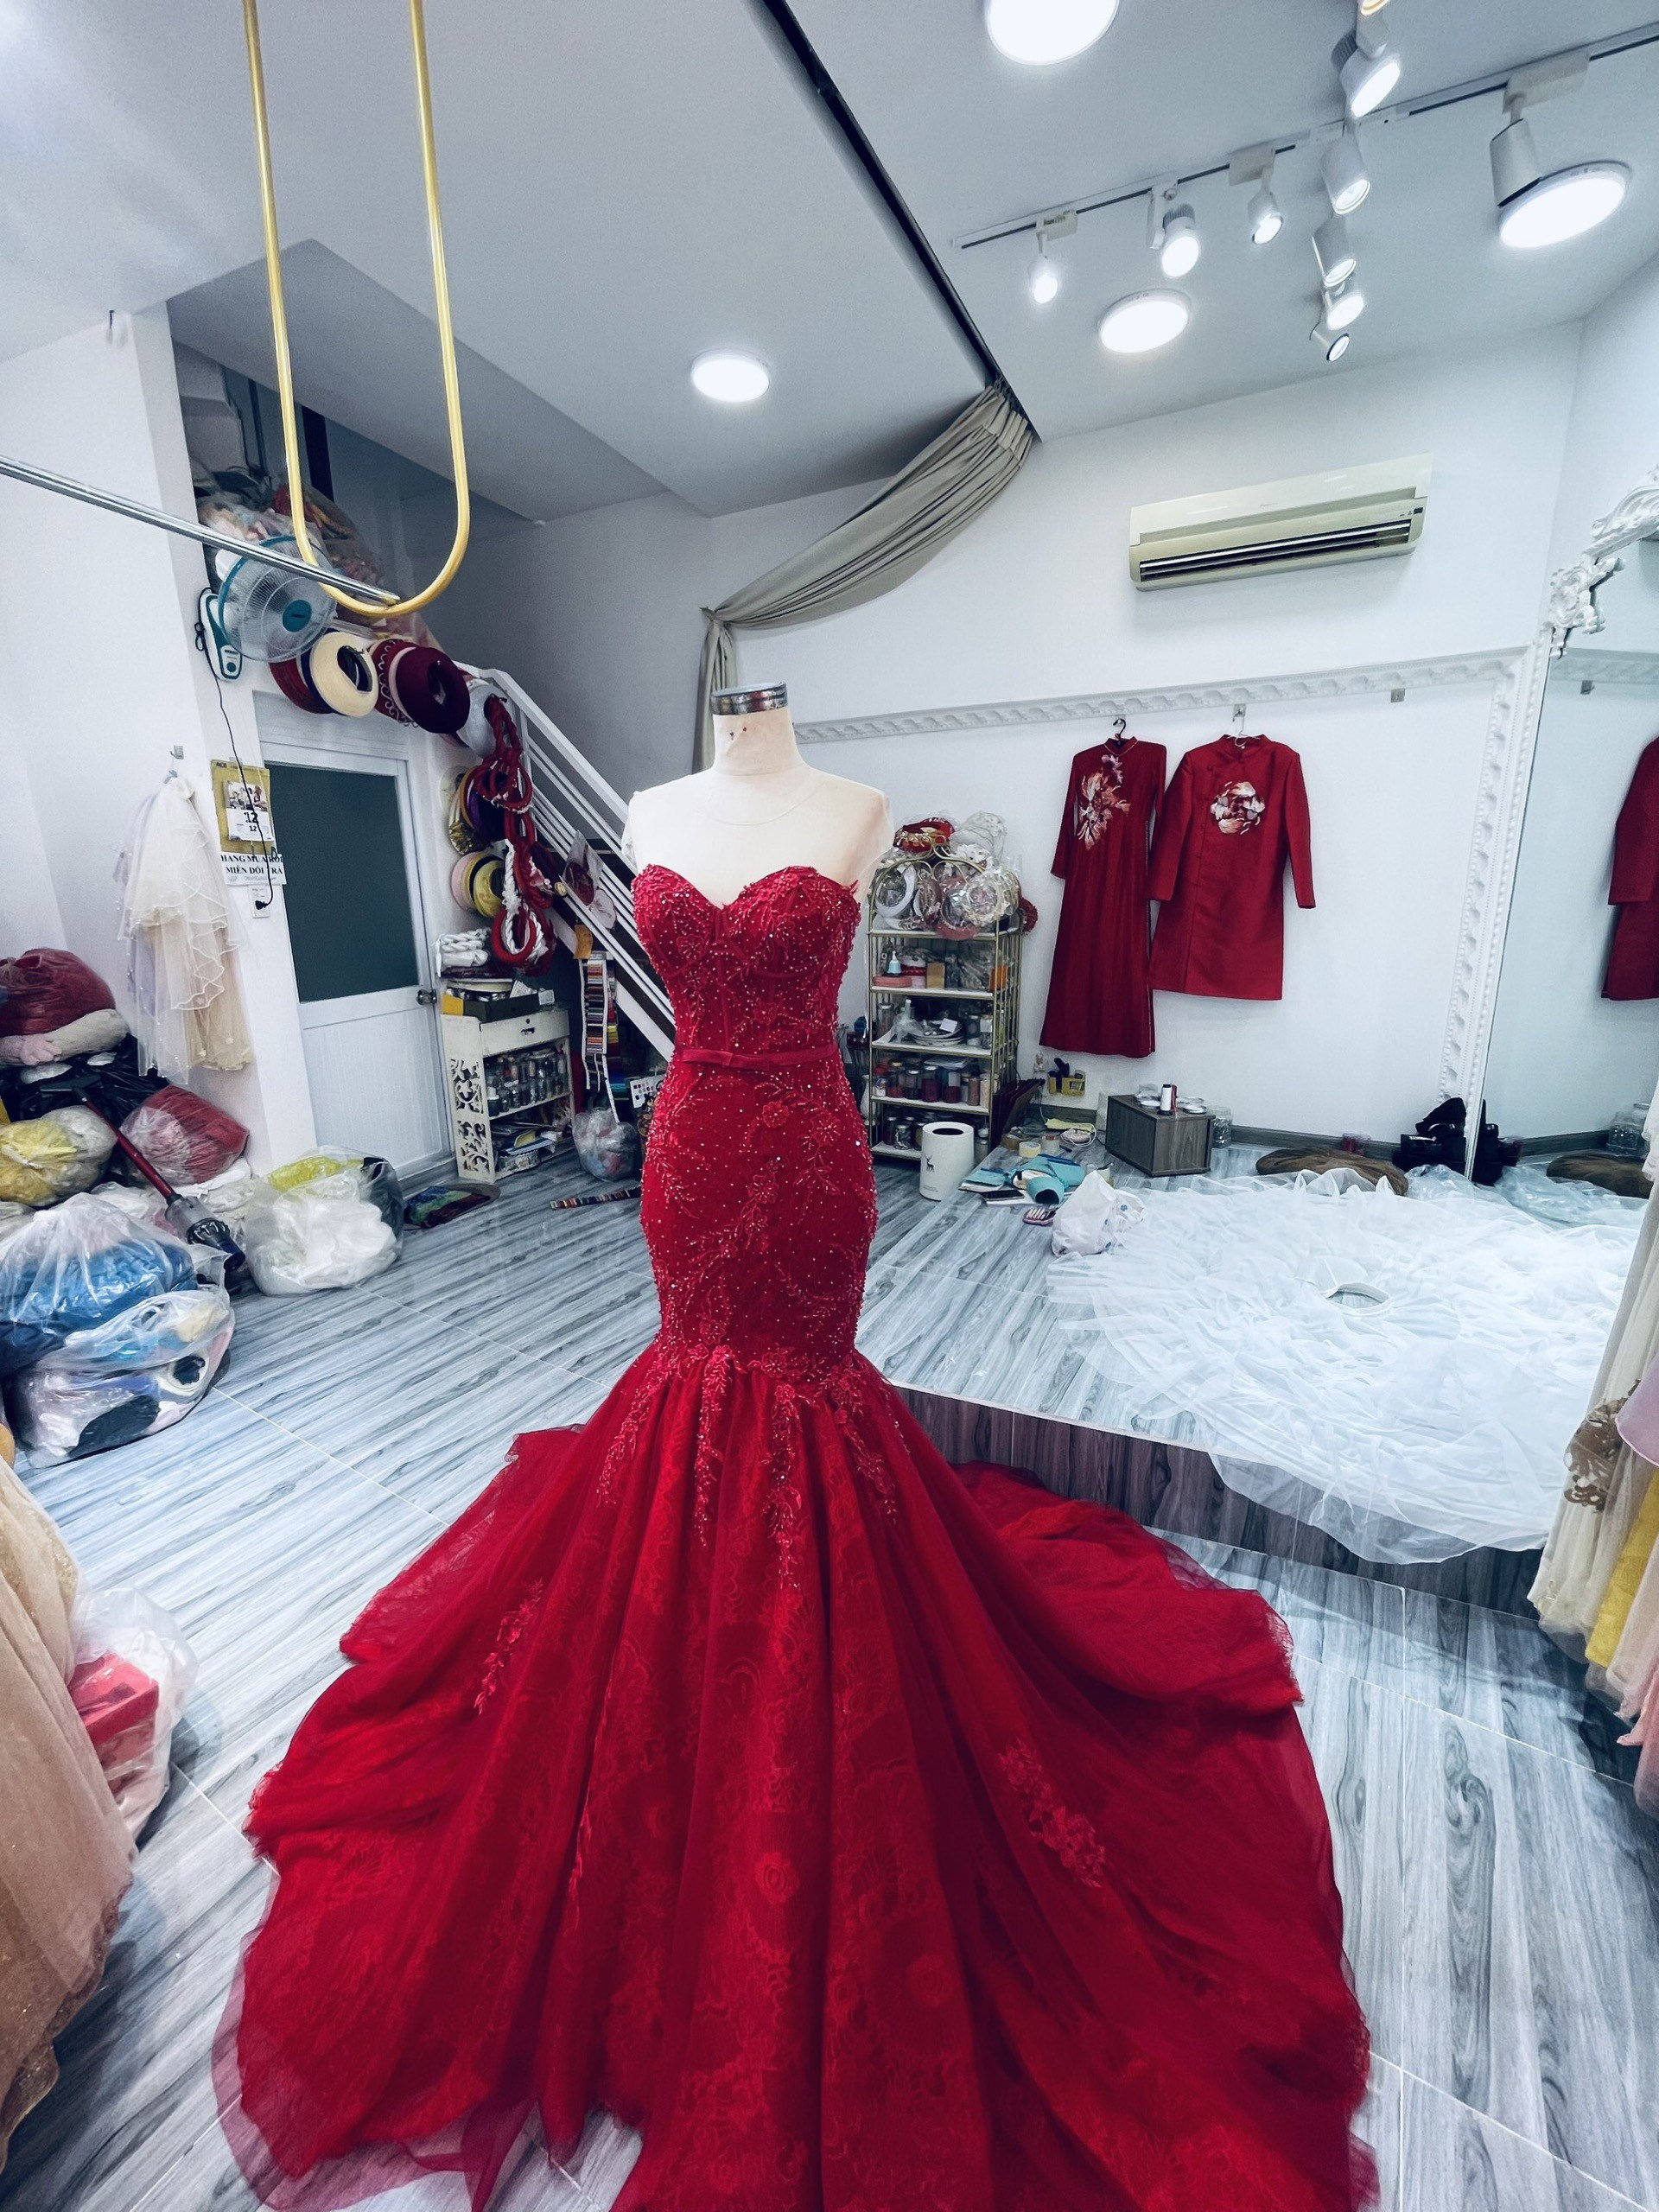 Handmade Red Tulle Princess Cathedral Red Gown For Wedding With Flower  Accents, Pleated Satin Bow Belt, And Empire Waist 2021 African Bridal Gown  From Lovemydress, $109.1